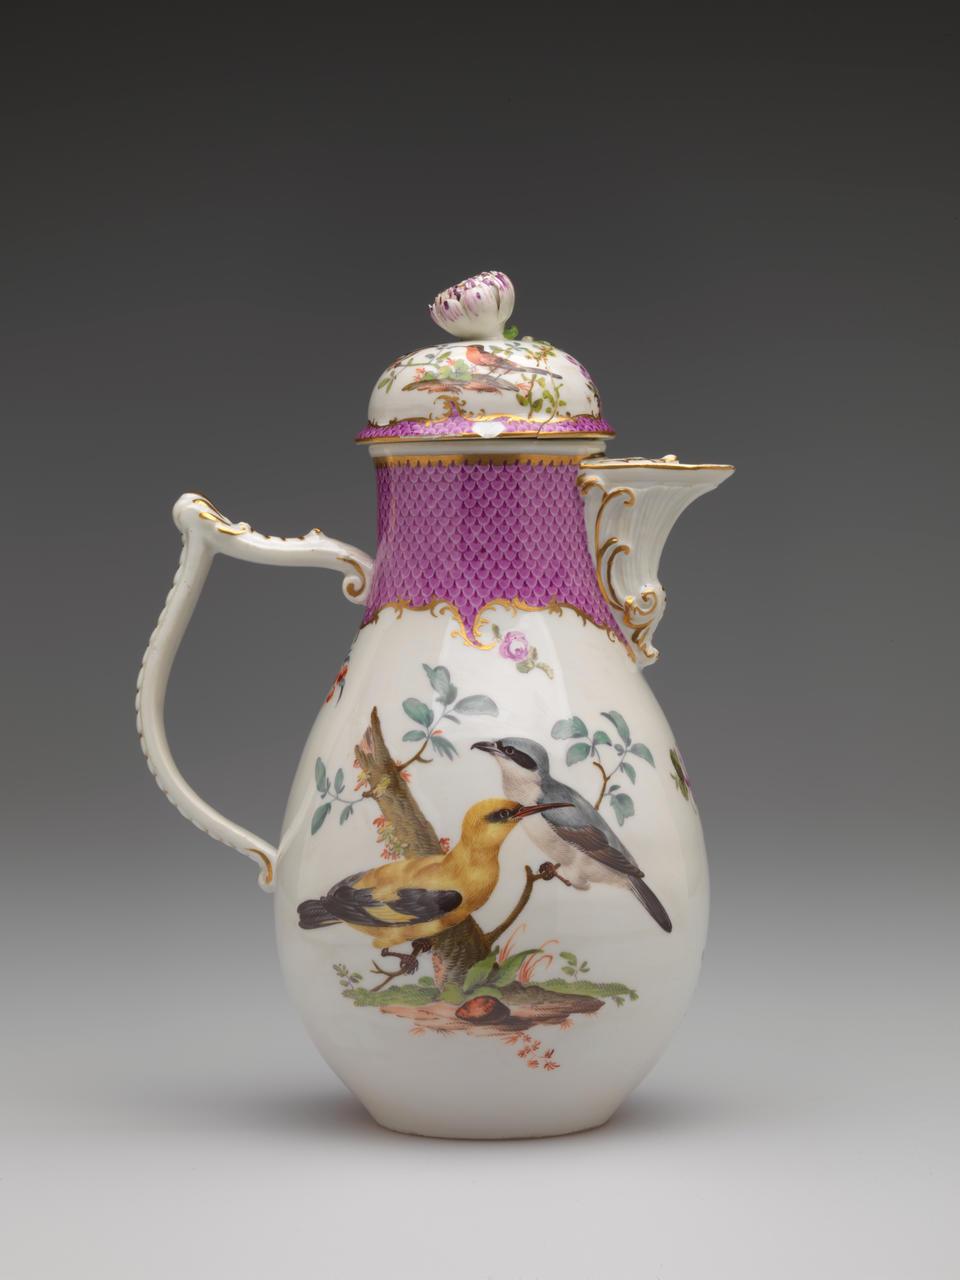 A white coffee pot with a handle and spout, gilded, pink, and floral decorations. There are two birds, blue and white, the other yellow and black, both positioned on branches.